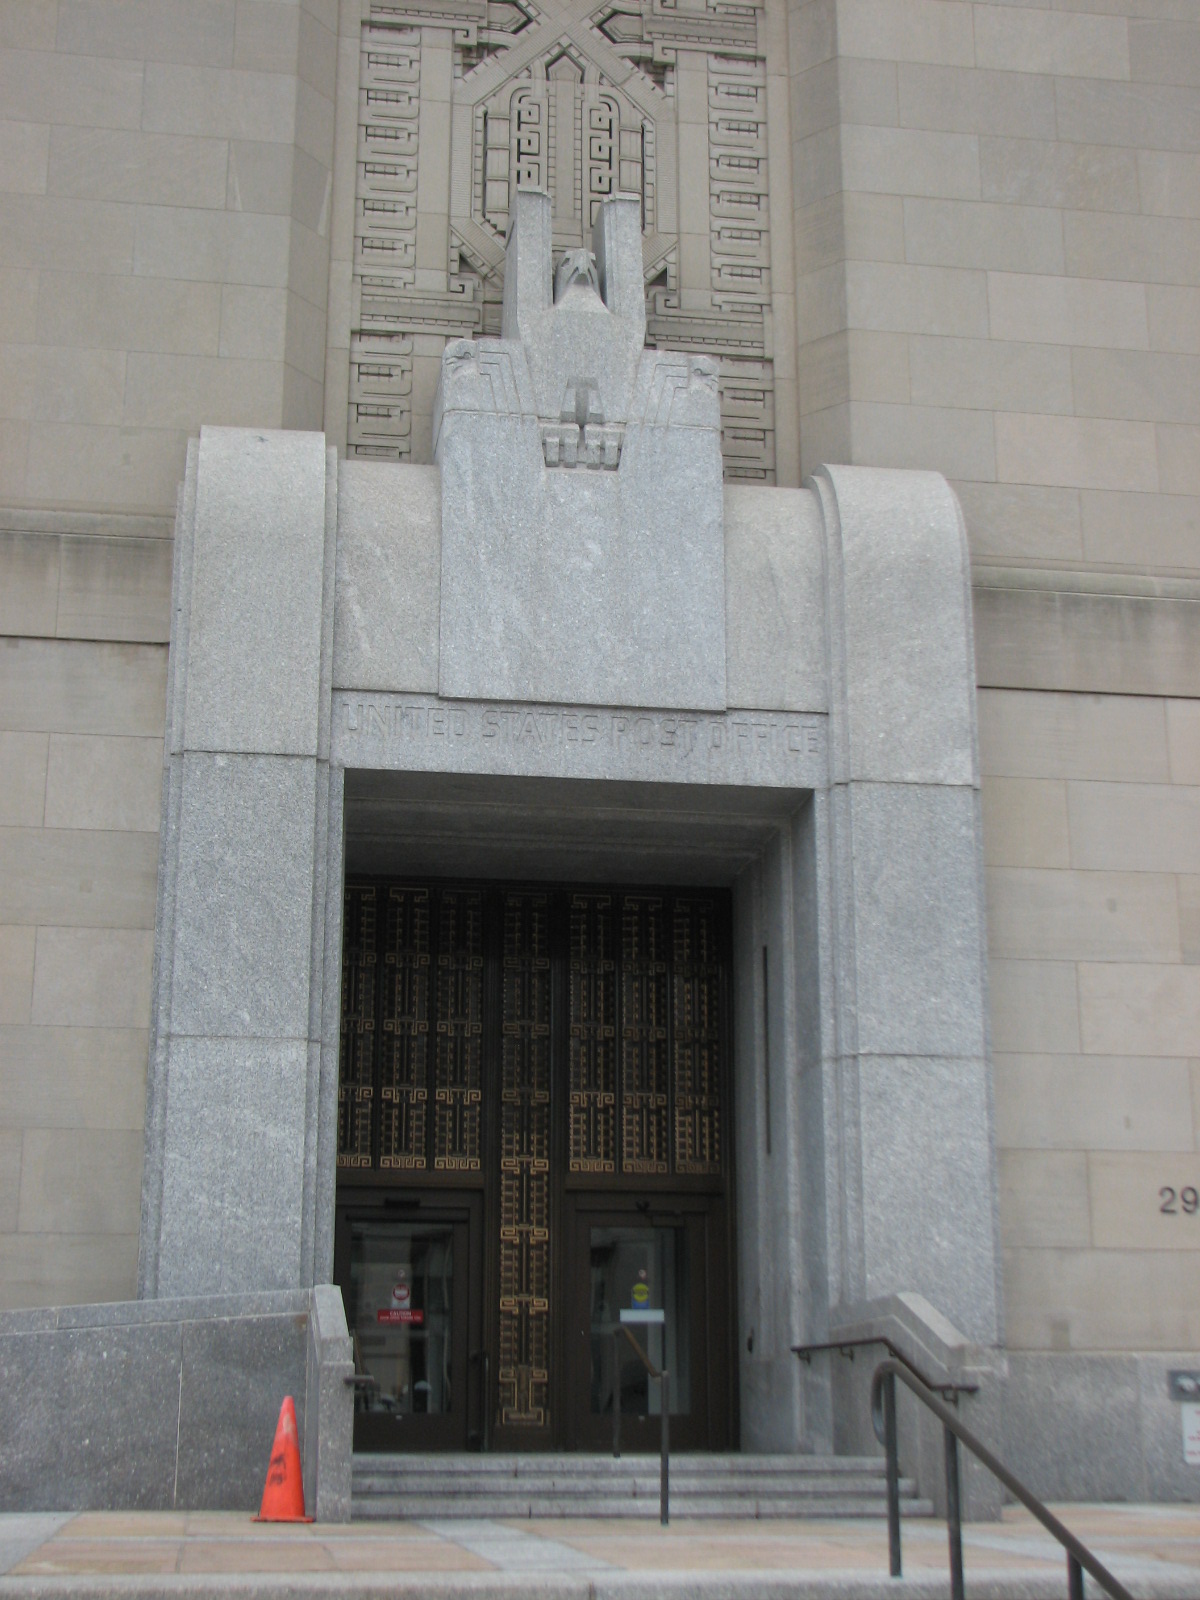 The north entrance to the building.